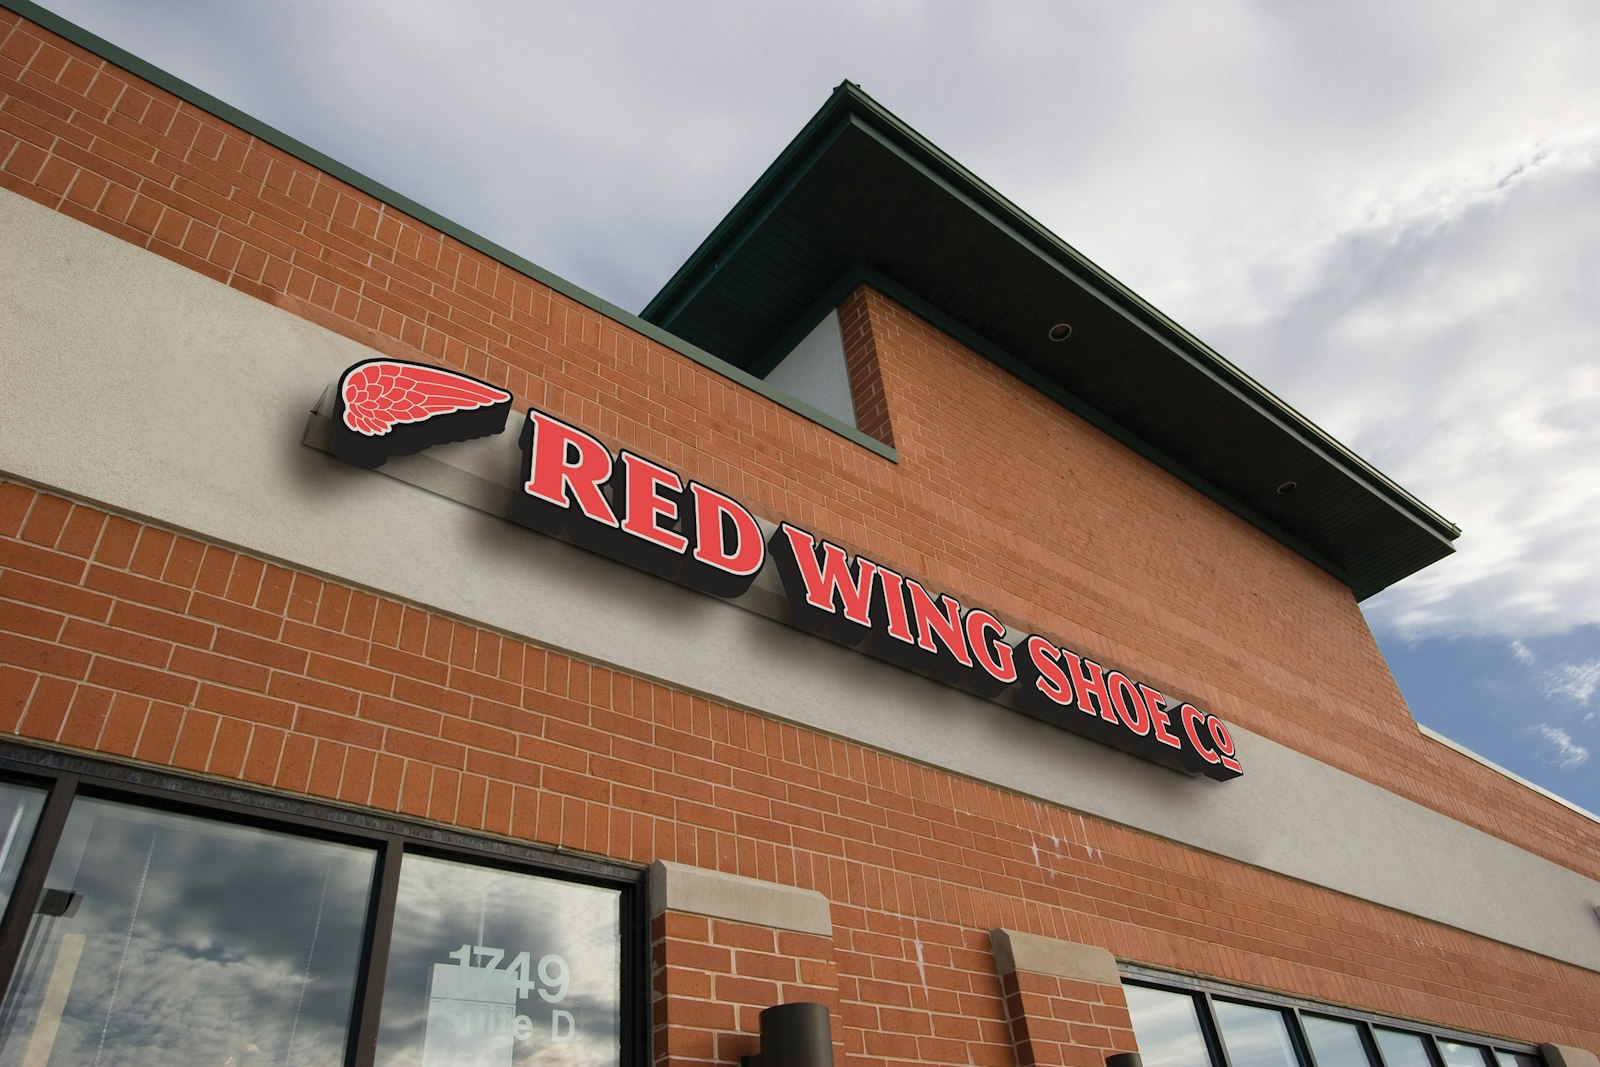 Redwing Chicago Building Signage 01